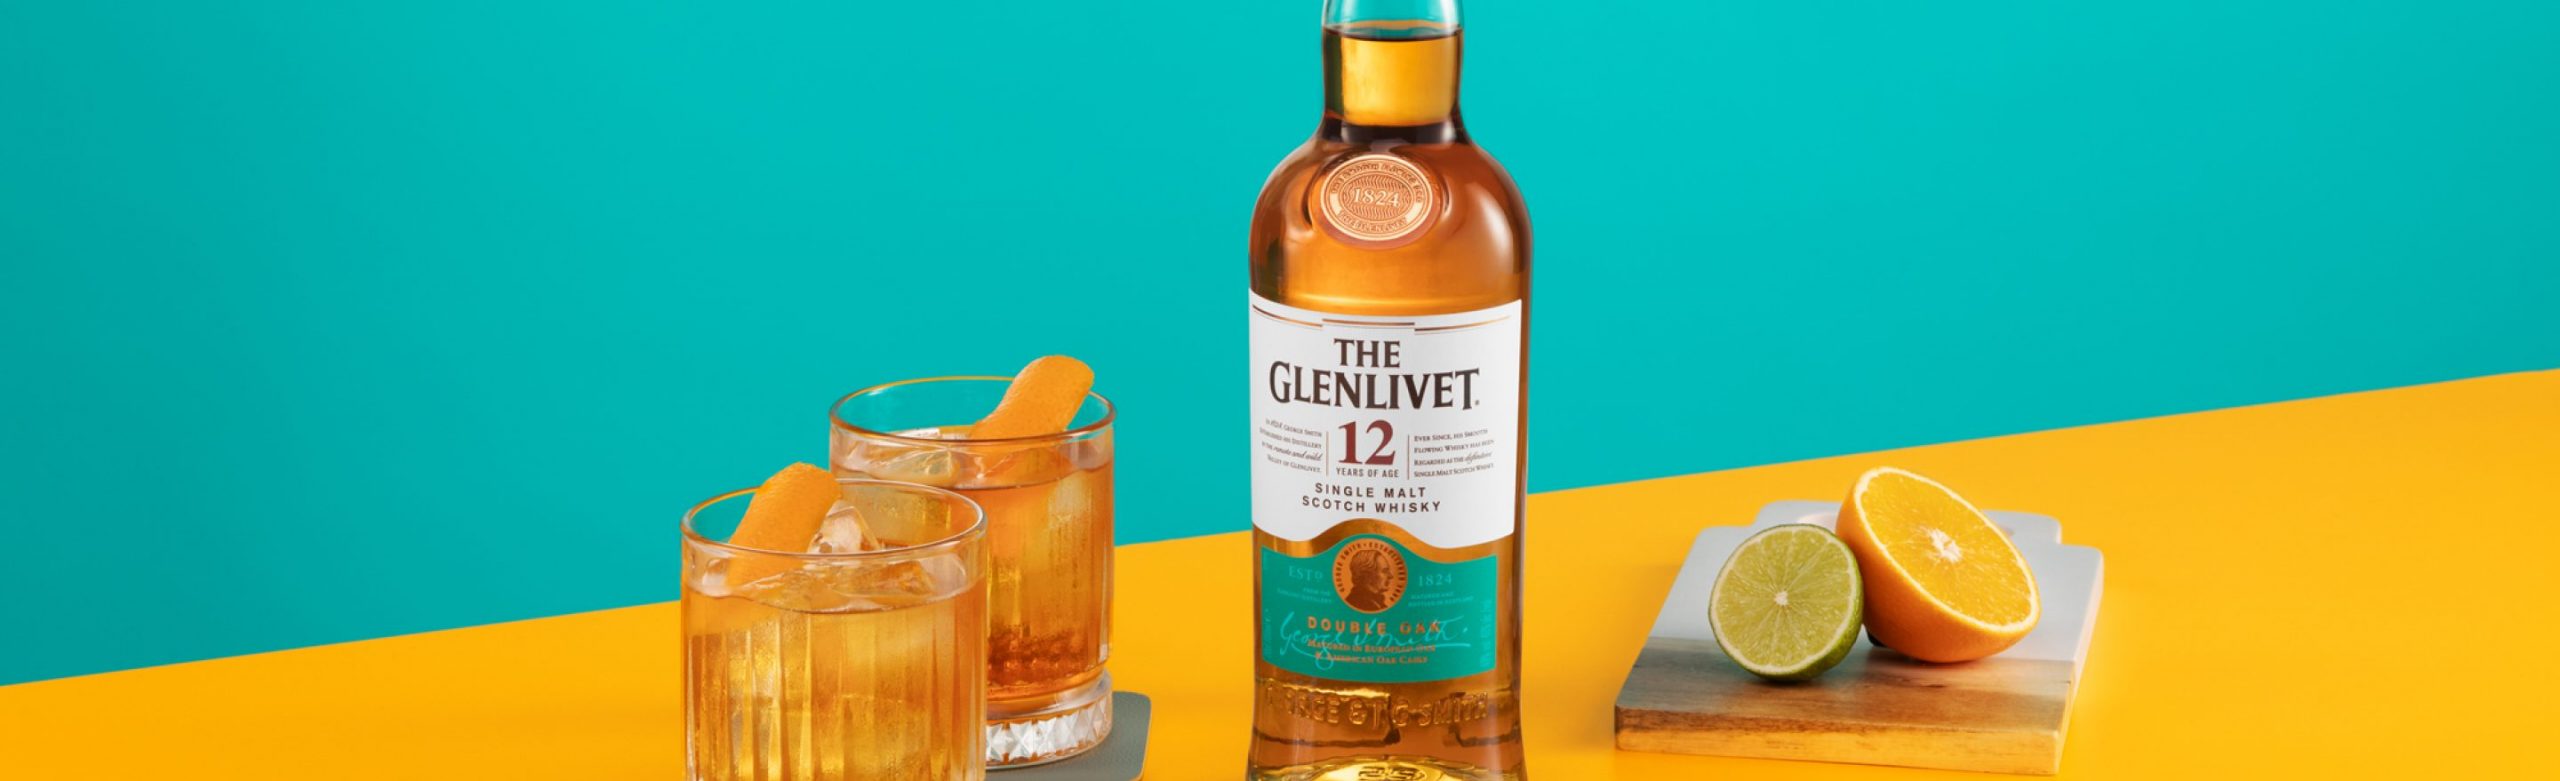 the glenlivet 12 years whisky with fruit